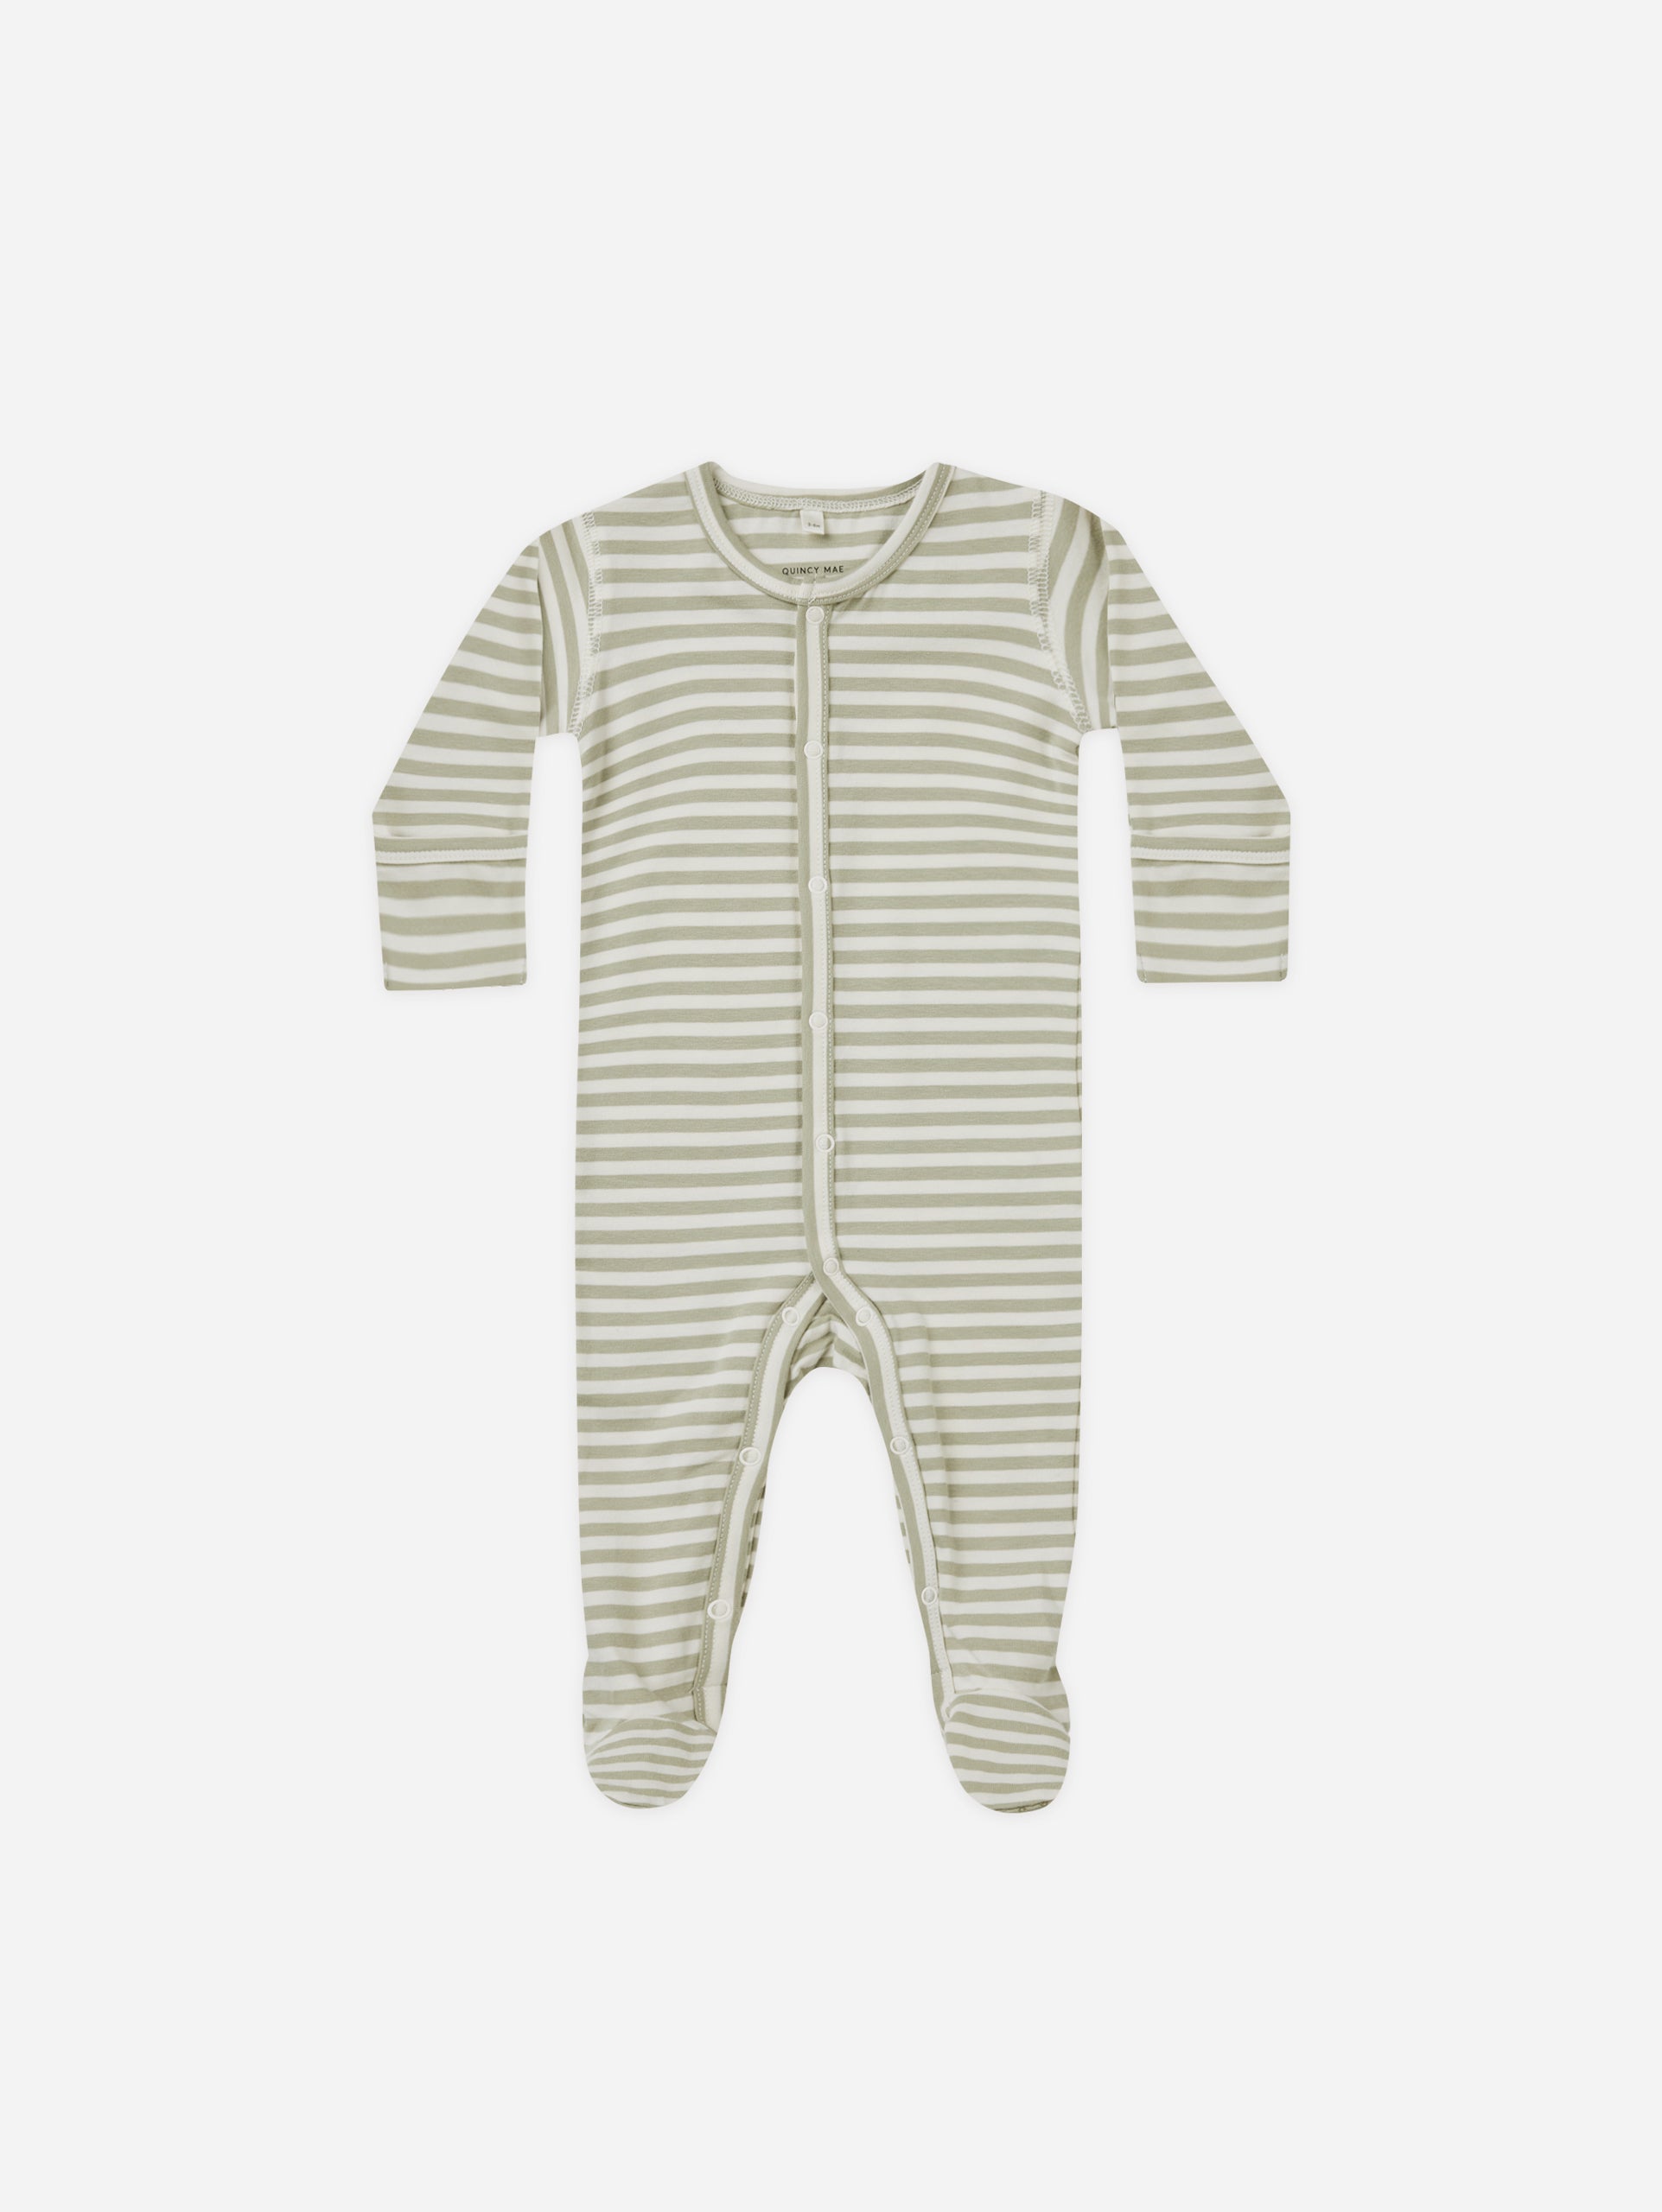 Full Snap Footie || Sage Stripe - Rylee + Cru | Kids Clothes | Trendy Baby Clothes | Modern Infant Outfits |